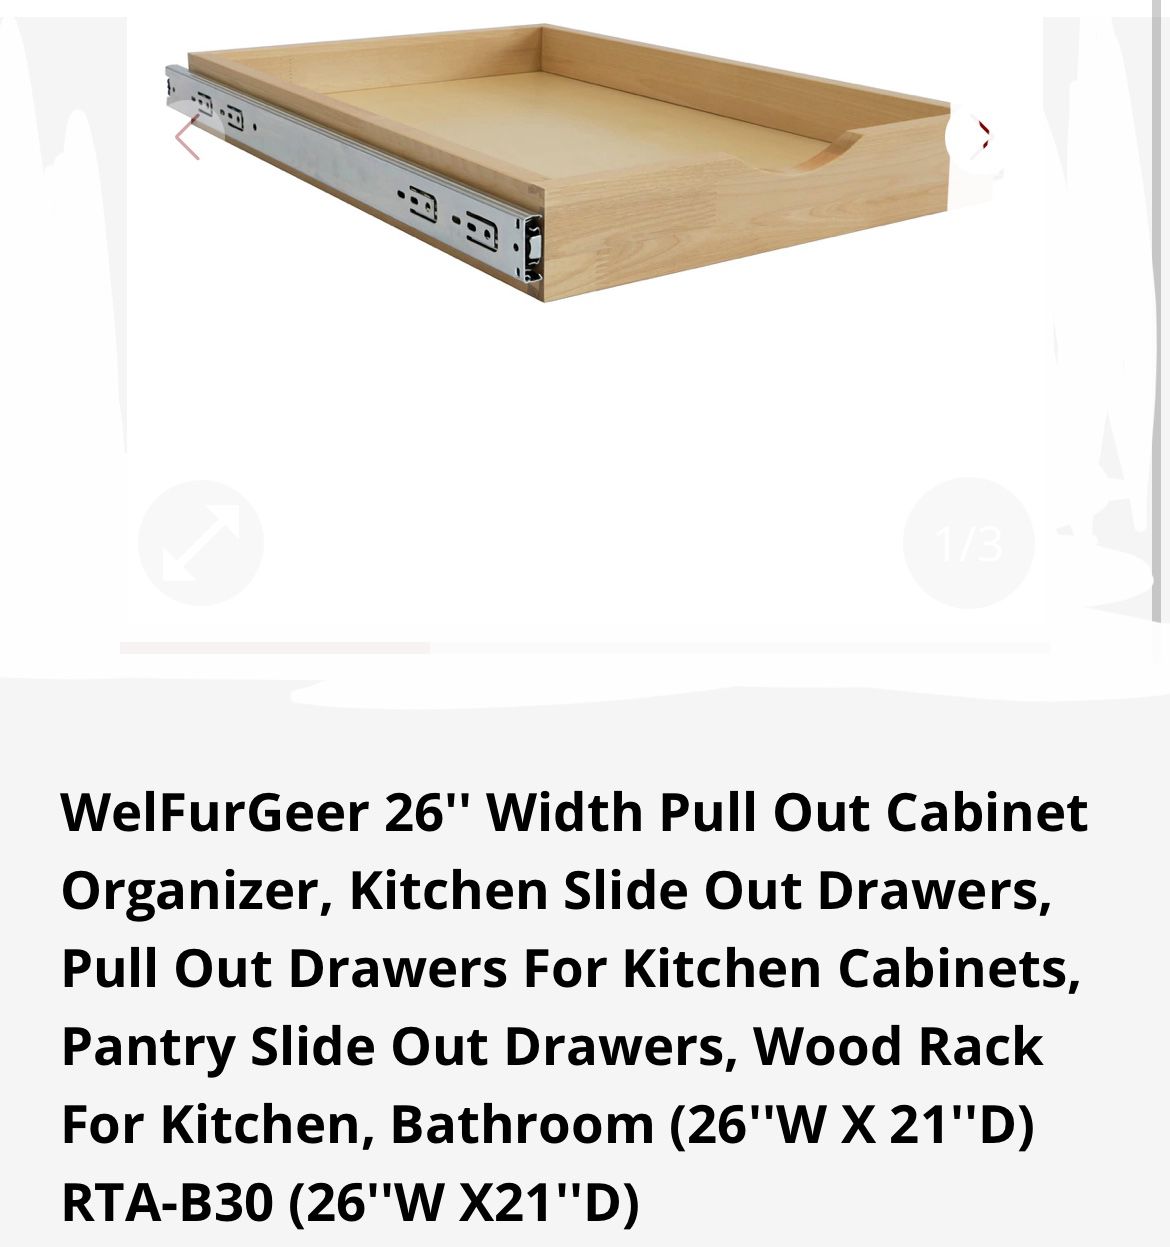 Pull Or Slide Out Cabinet/Drawer 26W x 21D NEW!